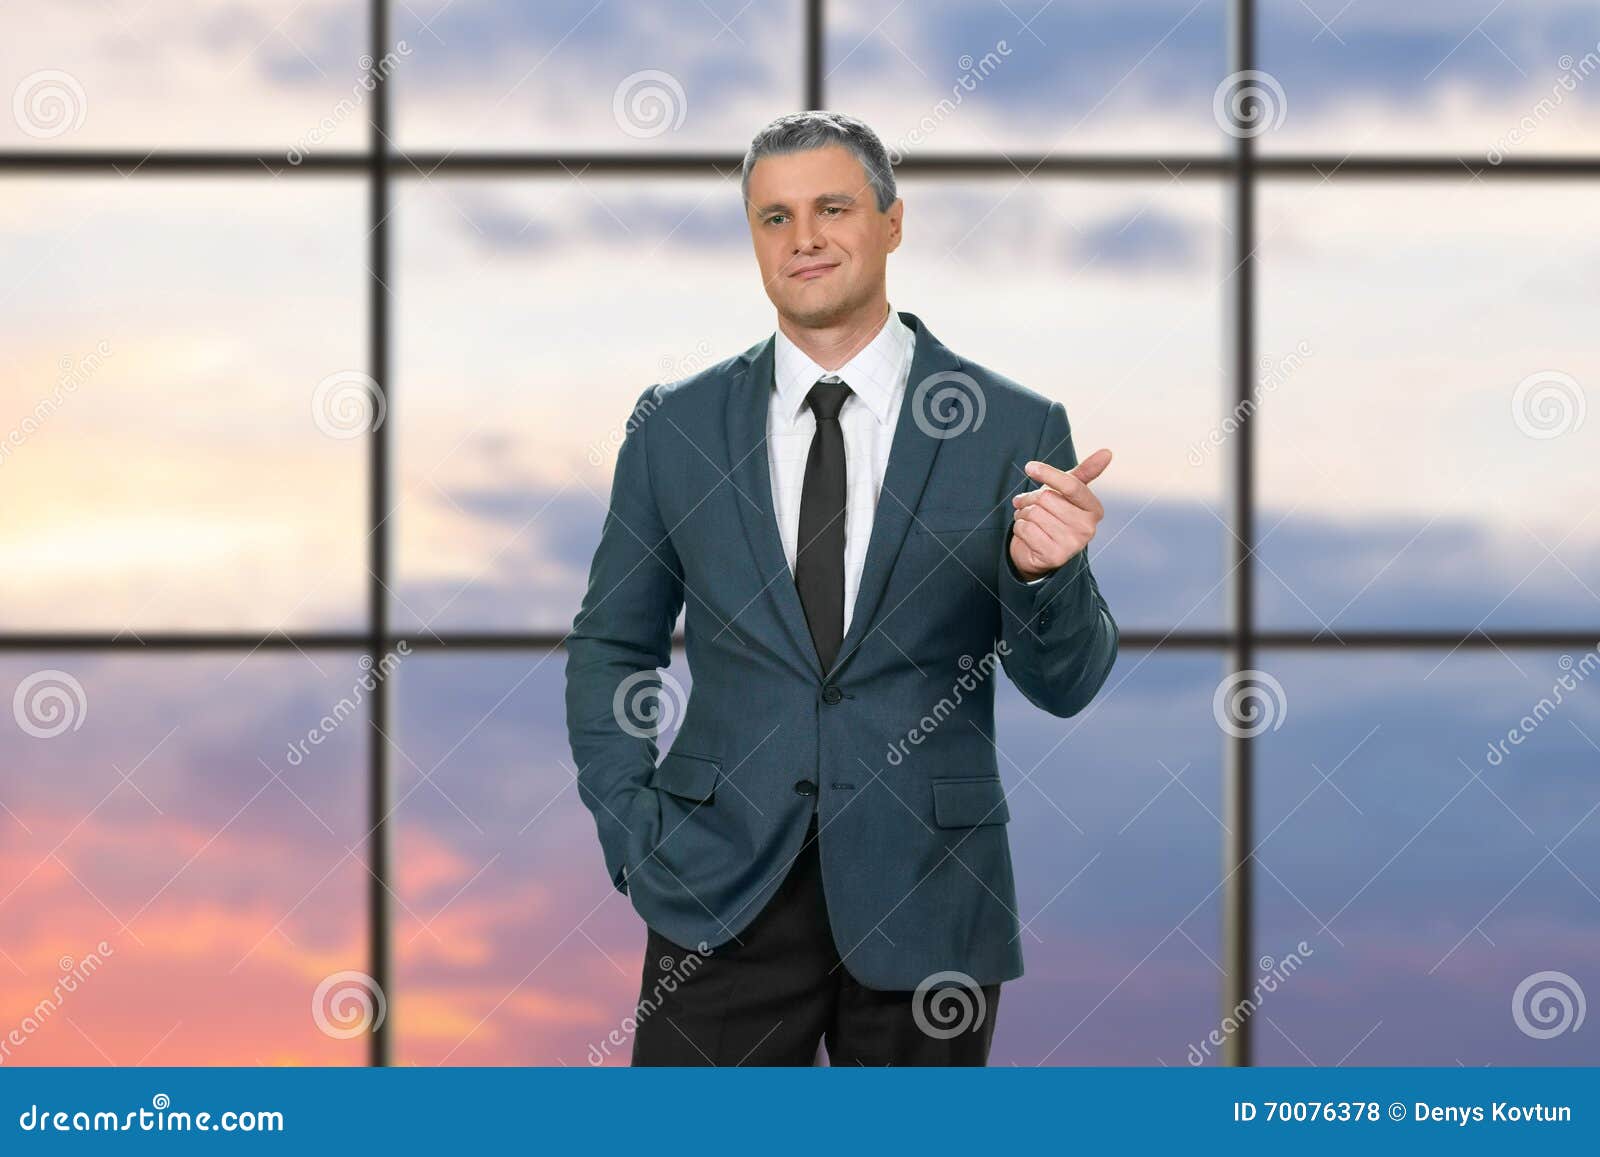 cocky adult businessman wearing suit.